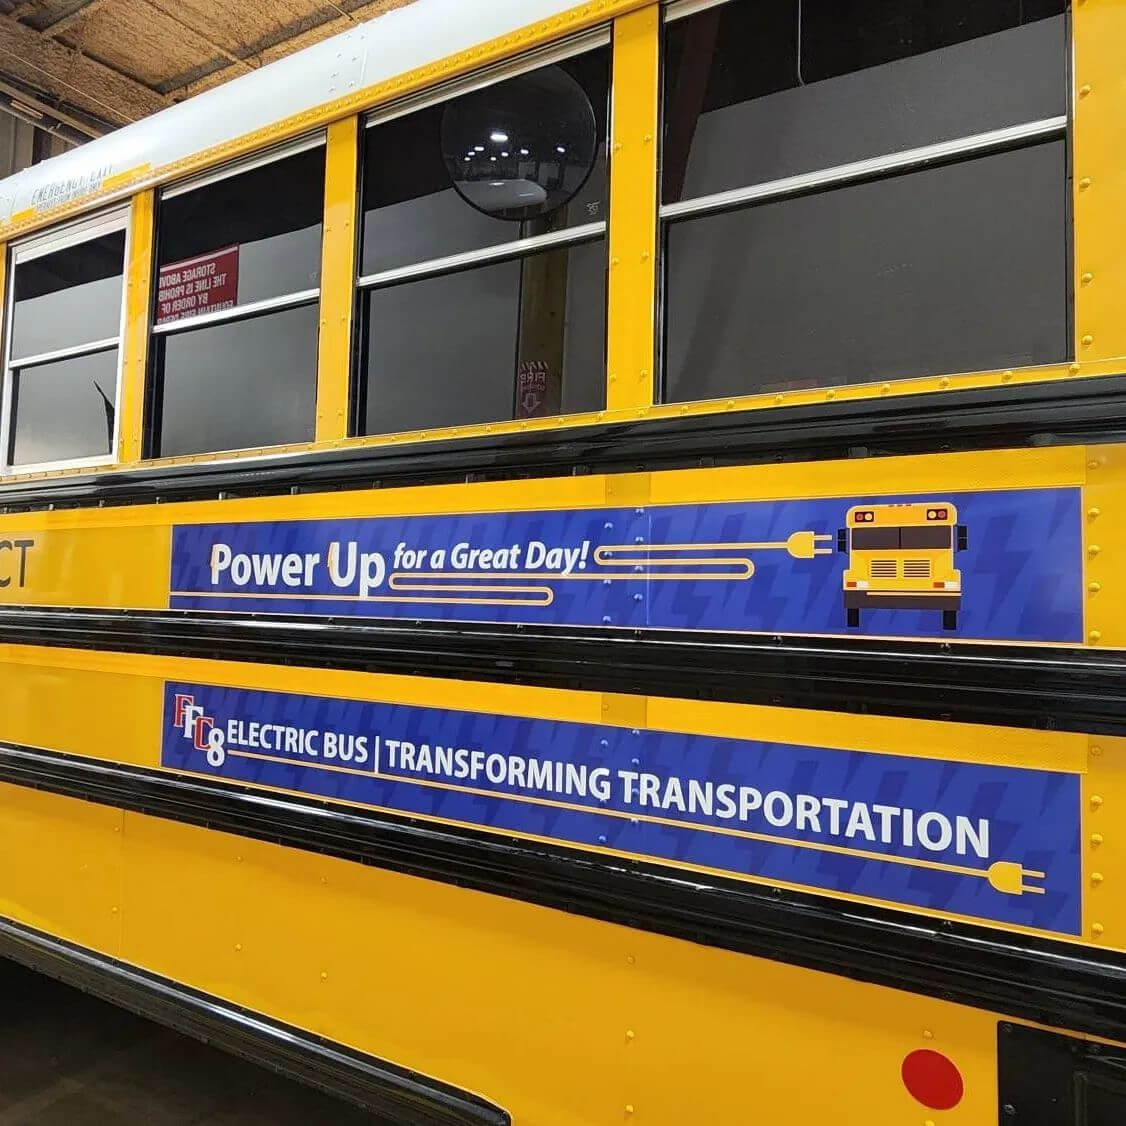 ffc8 electric bus transforming transportation side decals power up for a great day